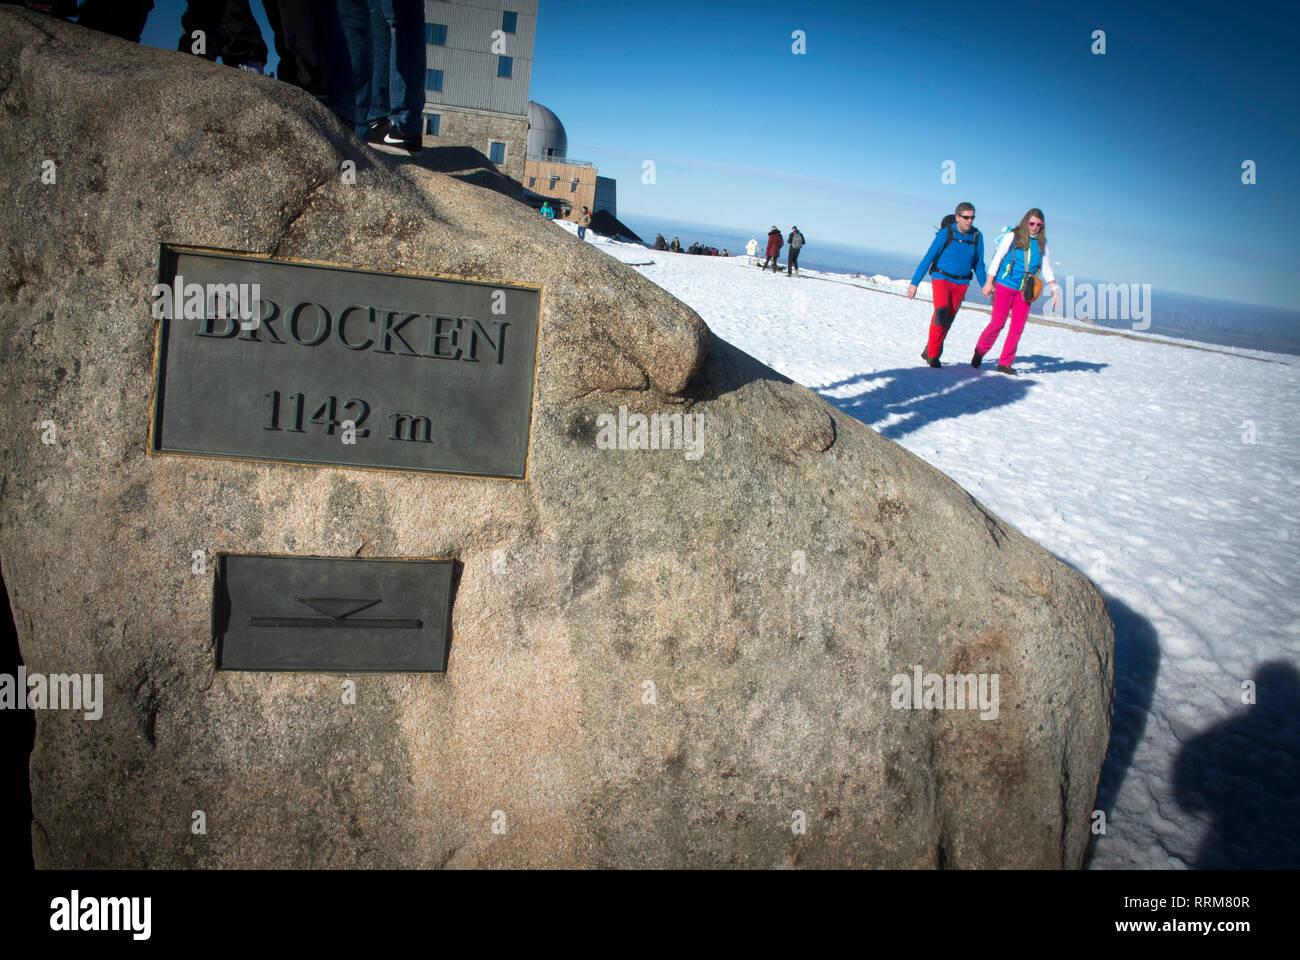 Walkers on the snow covered sumit of The Brocken in The Harz National Park, Germany Stock Photo